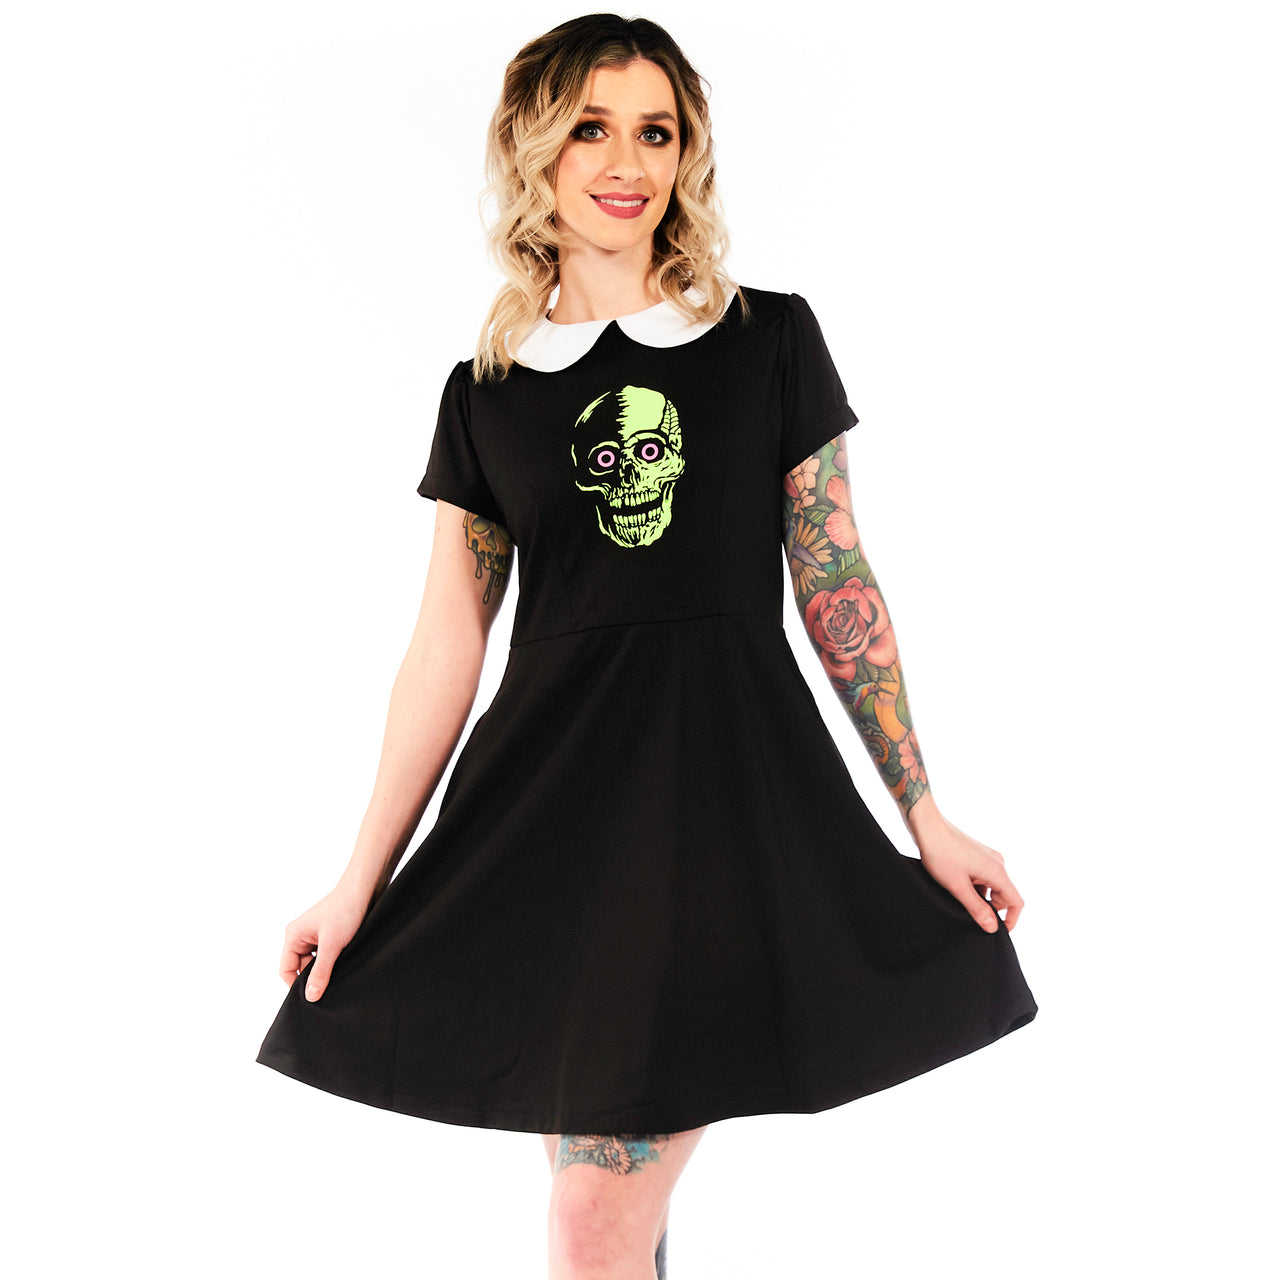 GHOUL TROUBLE ROUND COLLAR SKULL DRESS